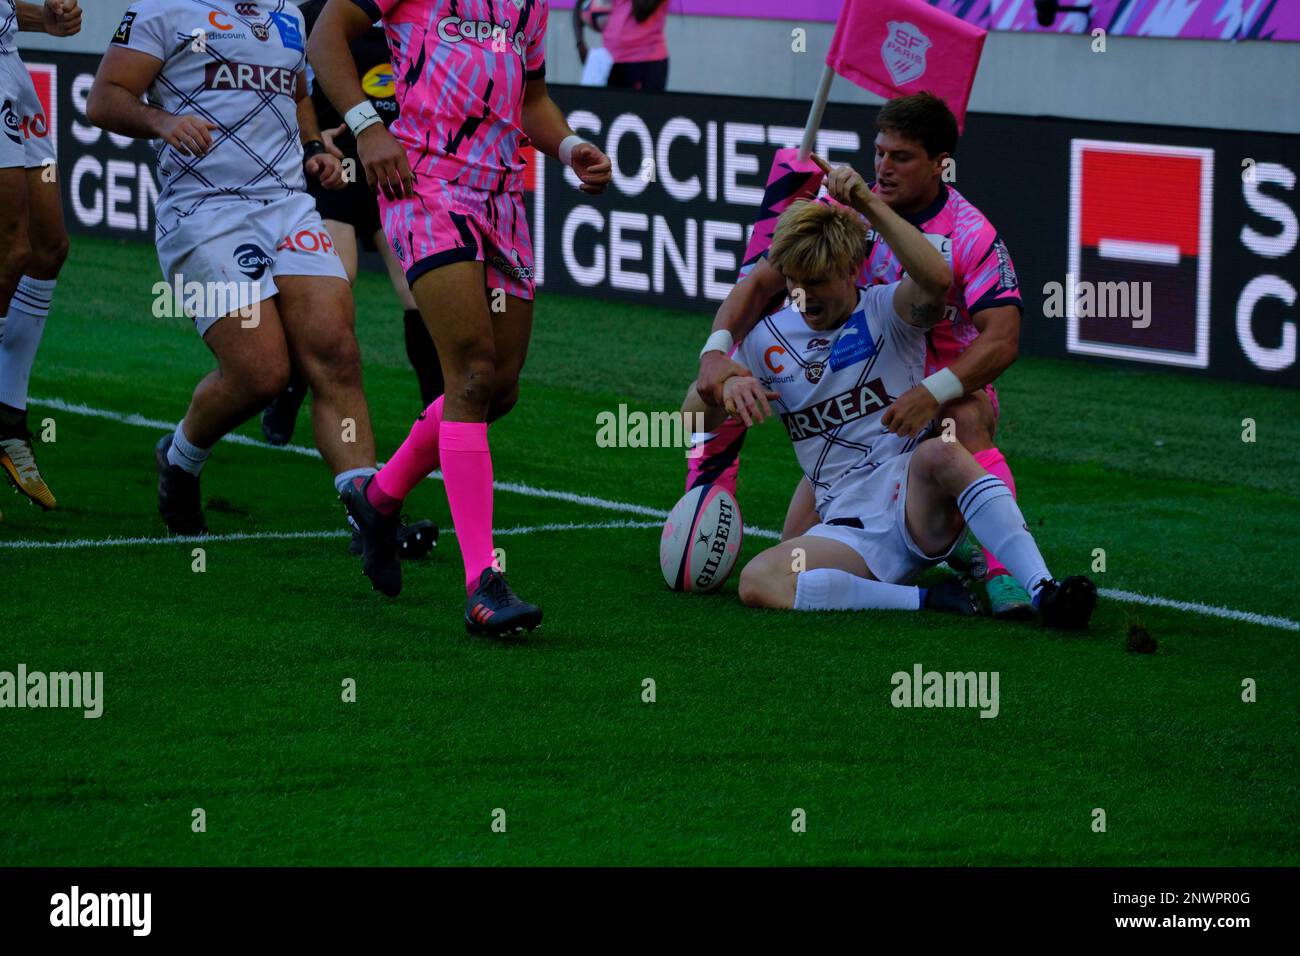 September 1, 2018 - Paris, France - Bordeaux-Begles Wing BLAIR CONNOR in  action during the French rugby championship Top 14 match between Stade  Francais and Bordeaux-Begles at Jean Bouin Stadium in Paris -